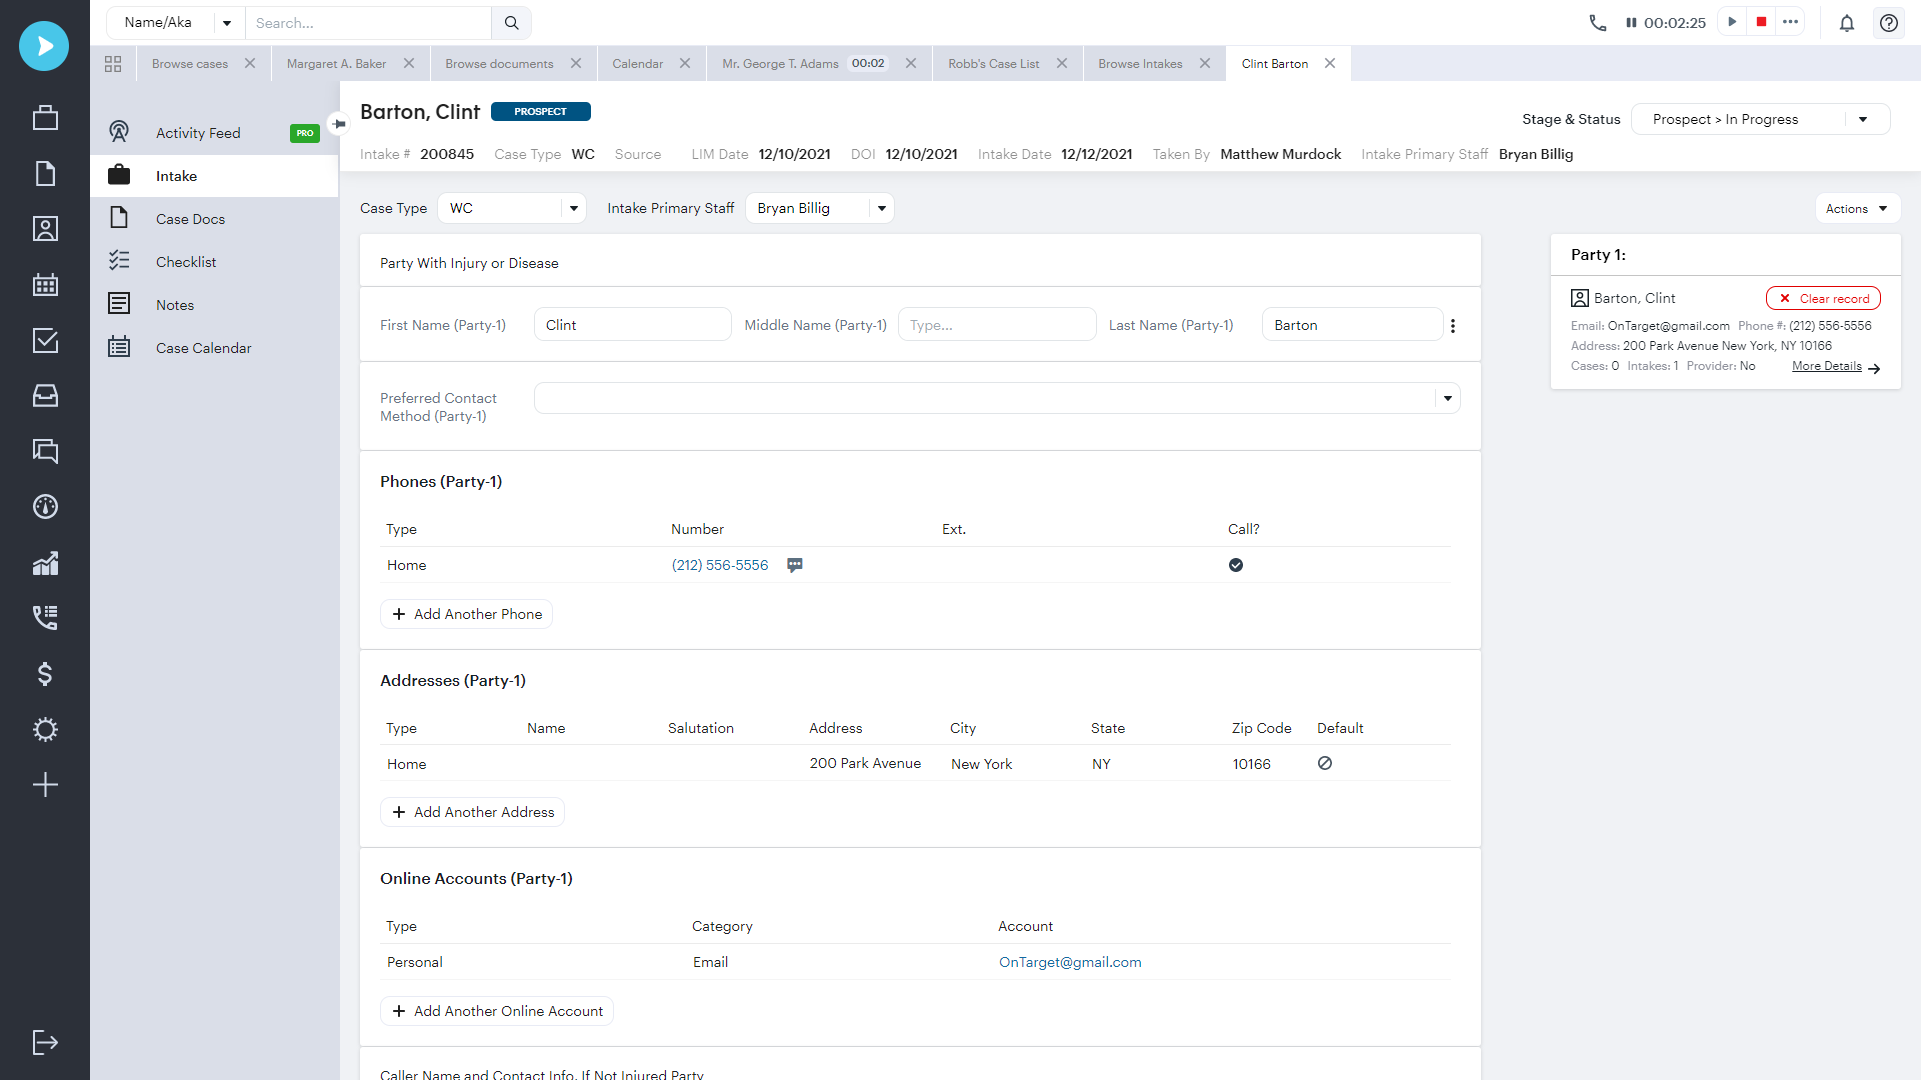 Seamlessly manage client intakes with fully-native intake capabilities